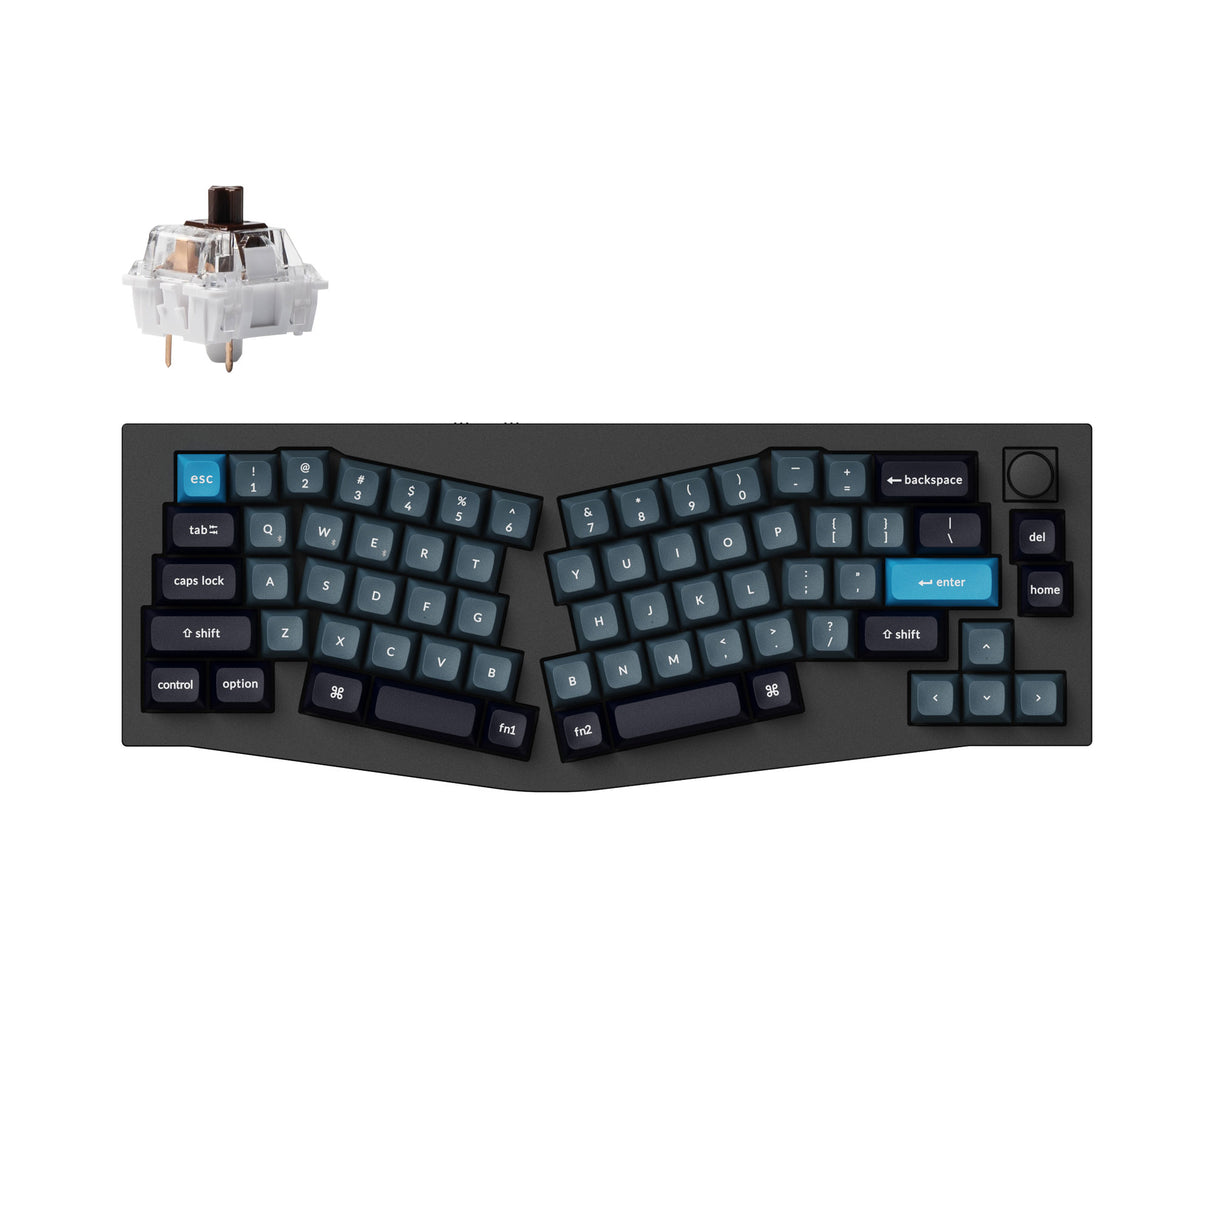 Keychron Q8 Pro QMK/VIA wireless custom mechanical keyboard 65 percent Alice layout full aluminum black frame for Mac Windows Linux with RGB backlight hot-swappable K Pro brown